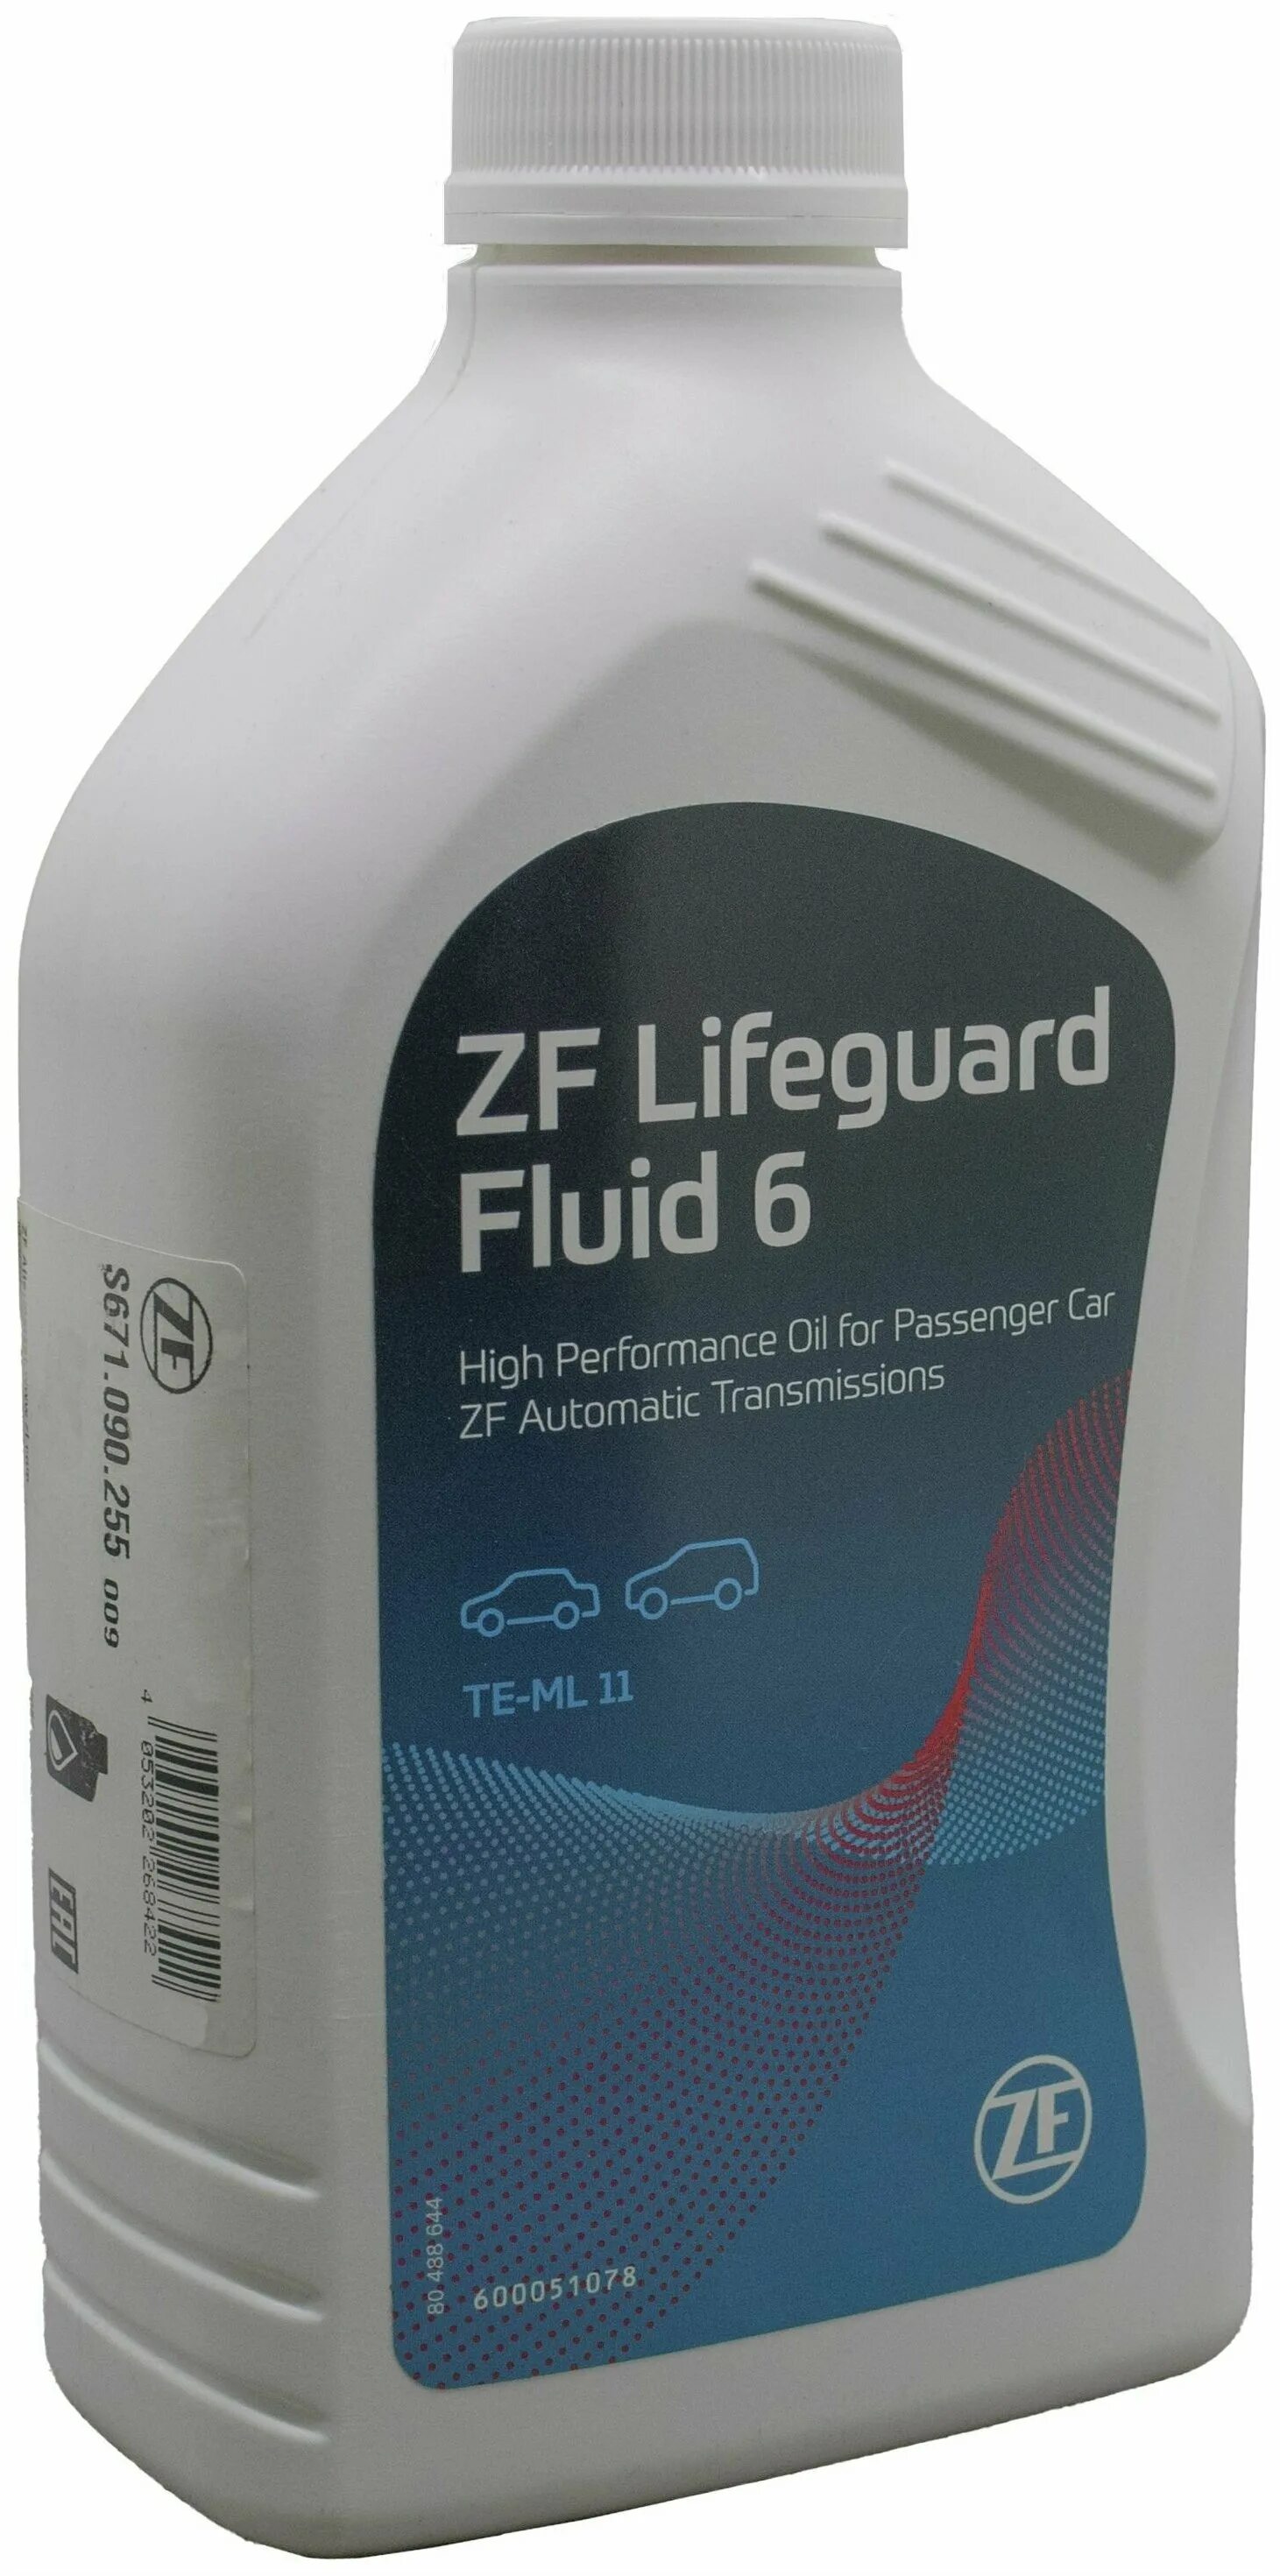 Atf zf. ZF Lifeguard Fluid 6. Масло АТФ Lifeguard. ZF LIFEGUARDFLUID Fluid 6 заменитель ZIC. Масло ZF.